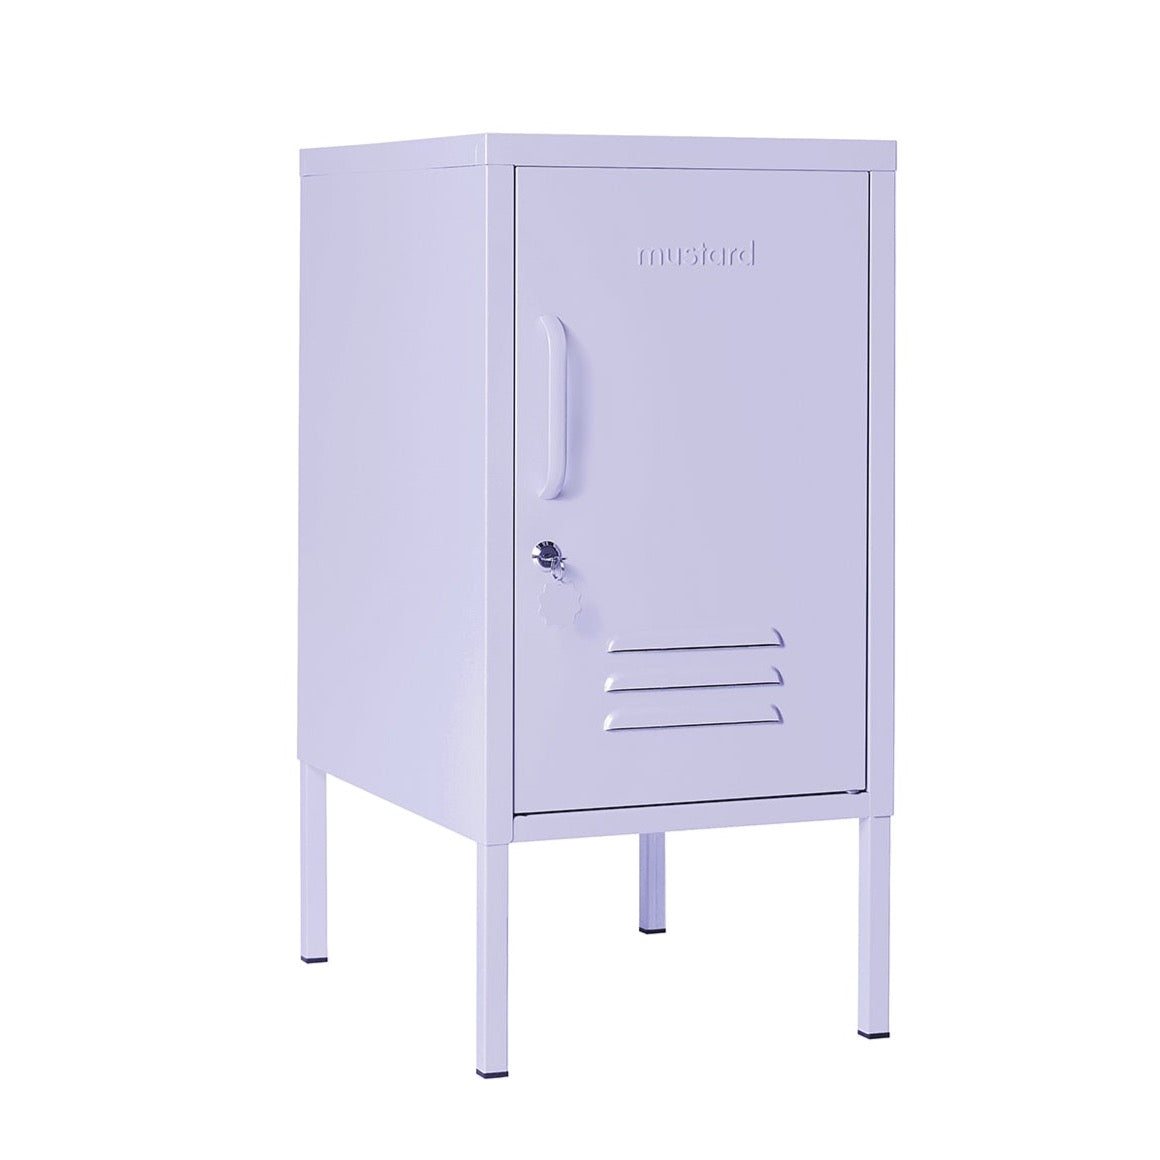 The Shorty Locker in Lilac By Mustard Made